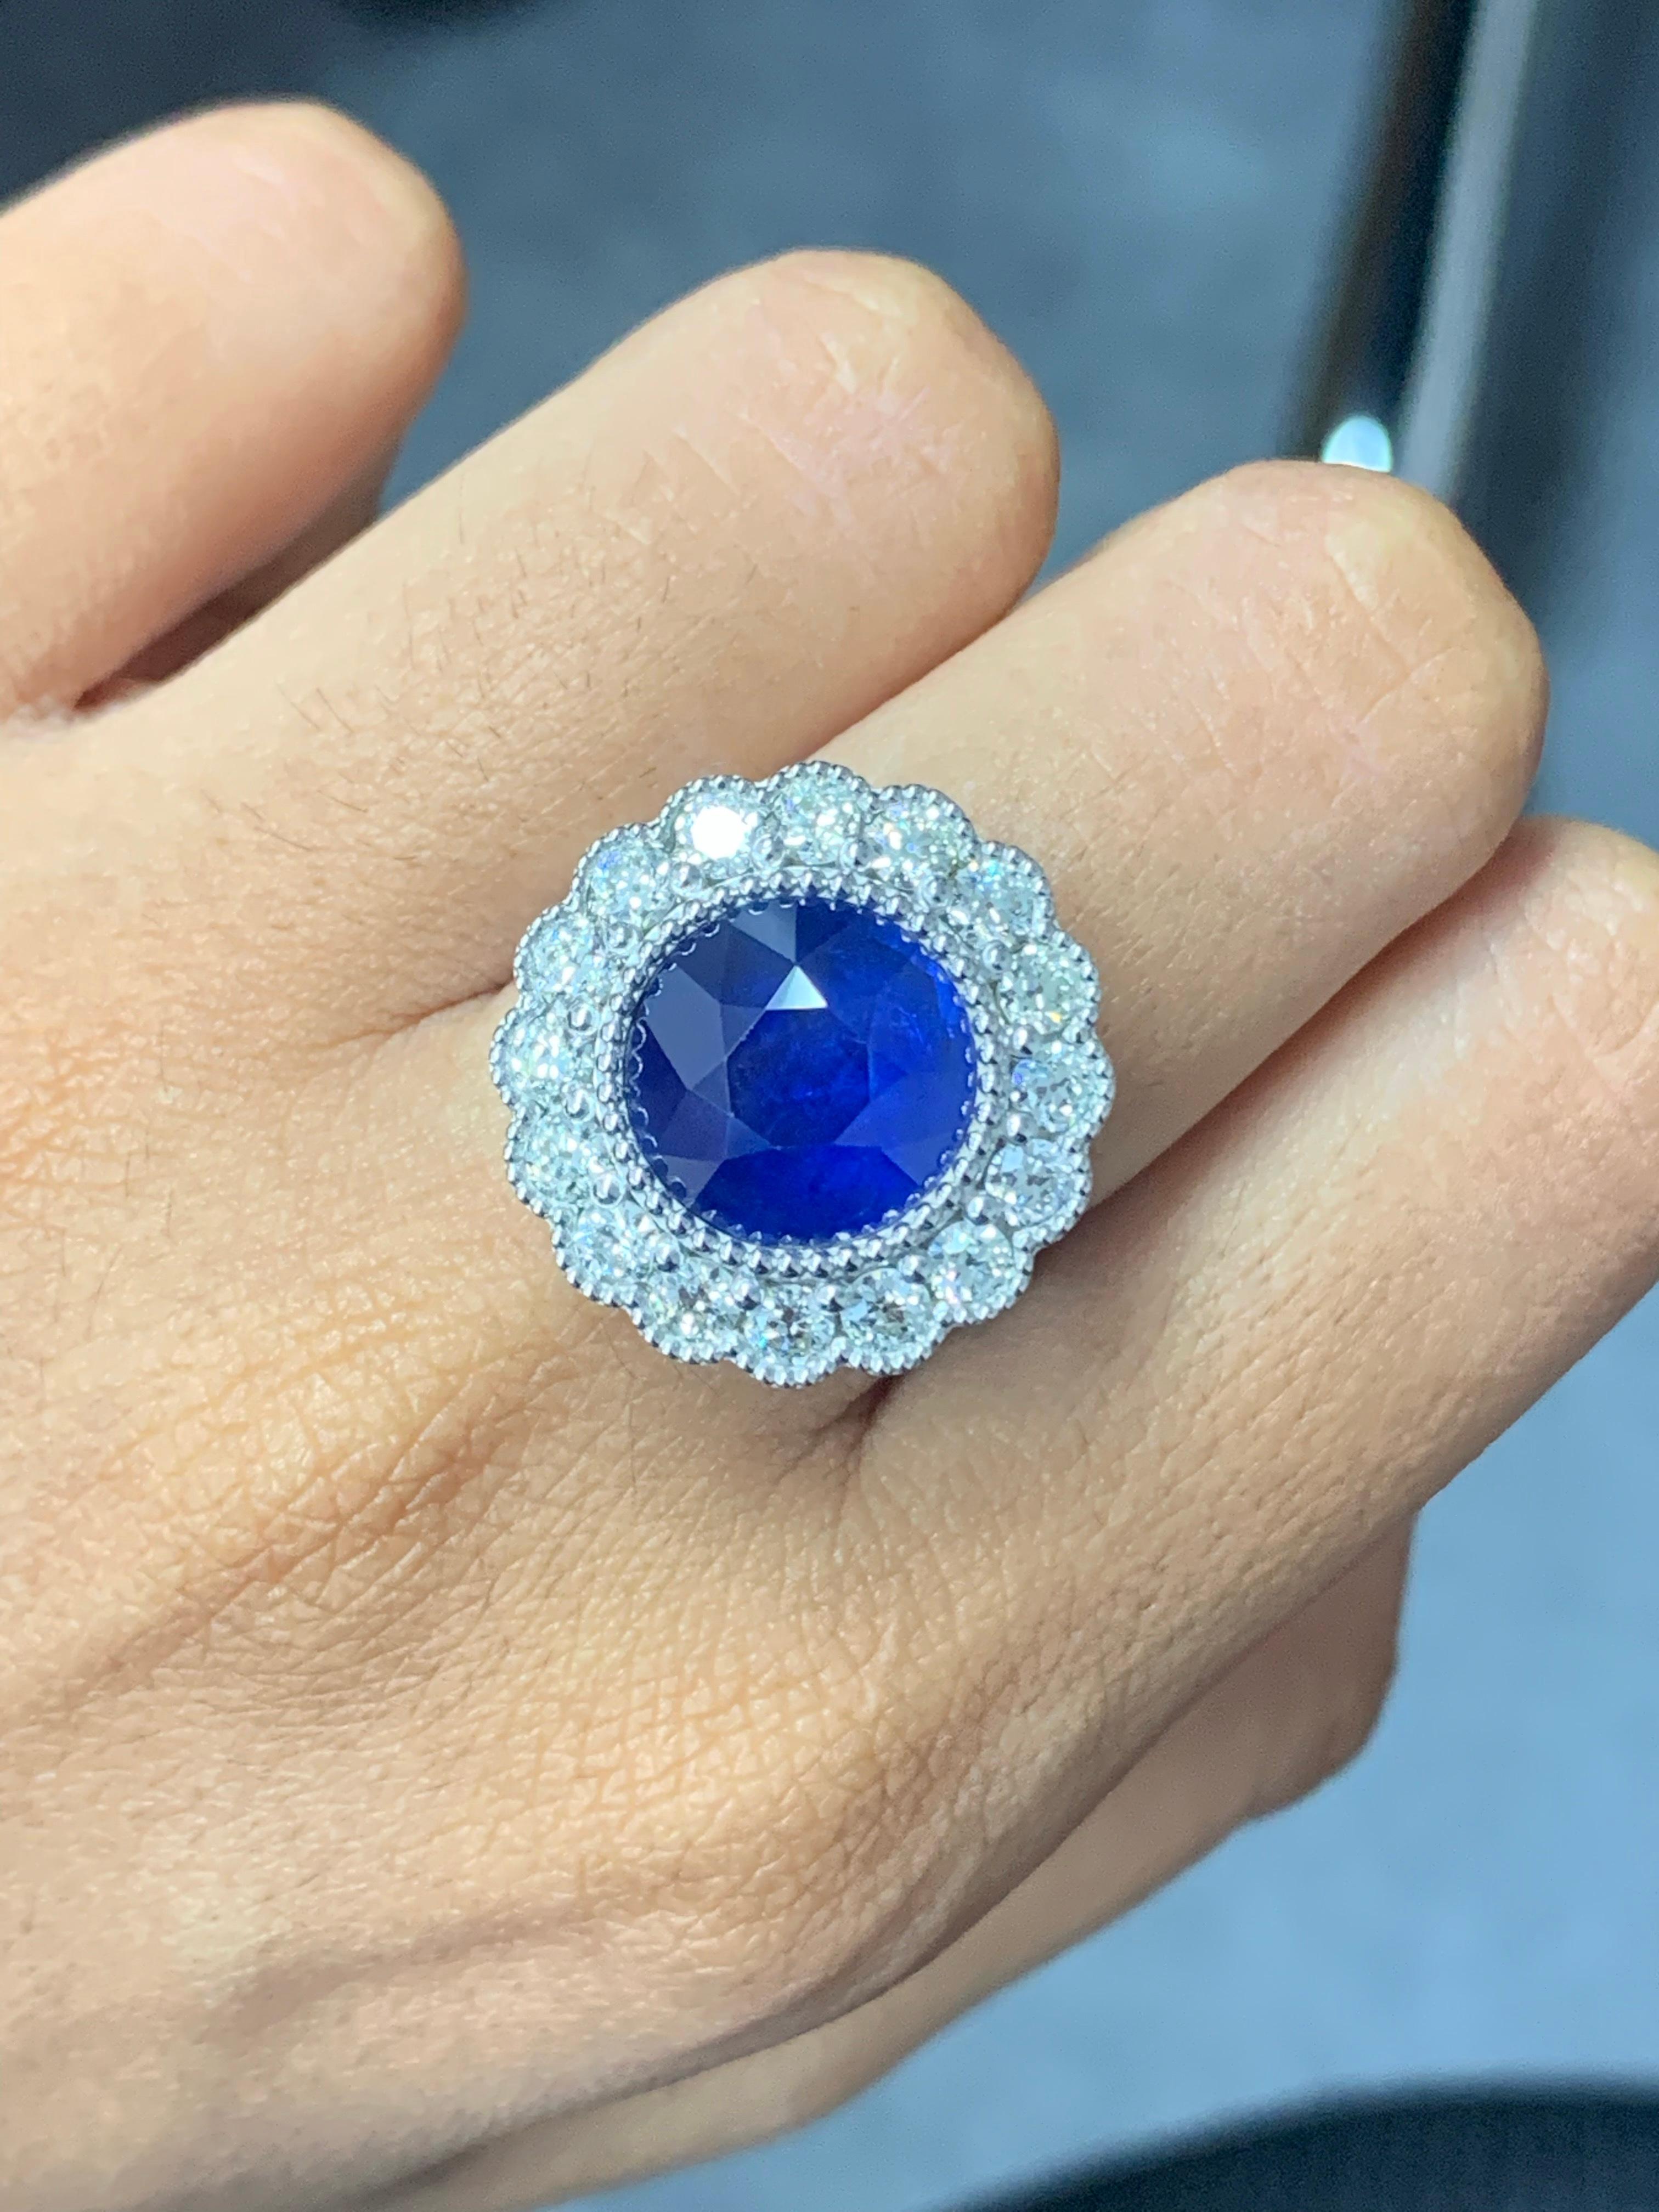 6.52 Ct Round Ceylon Sapphire Ring with Old Mine Cut Diamonds in 18K White Gold For Sale 2